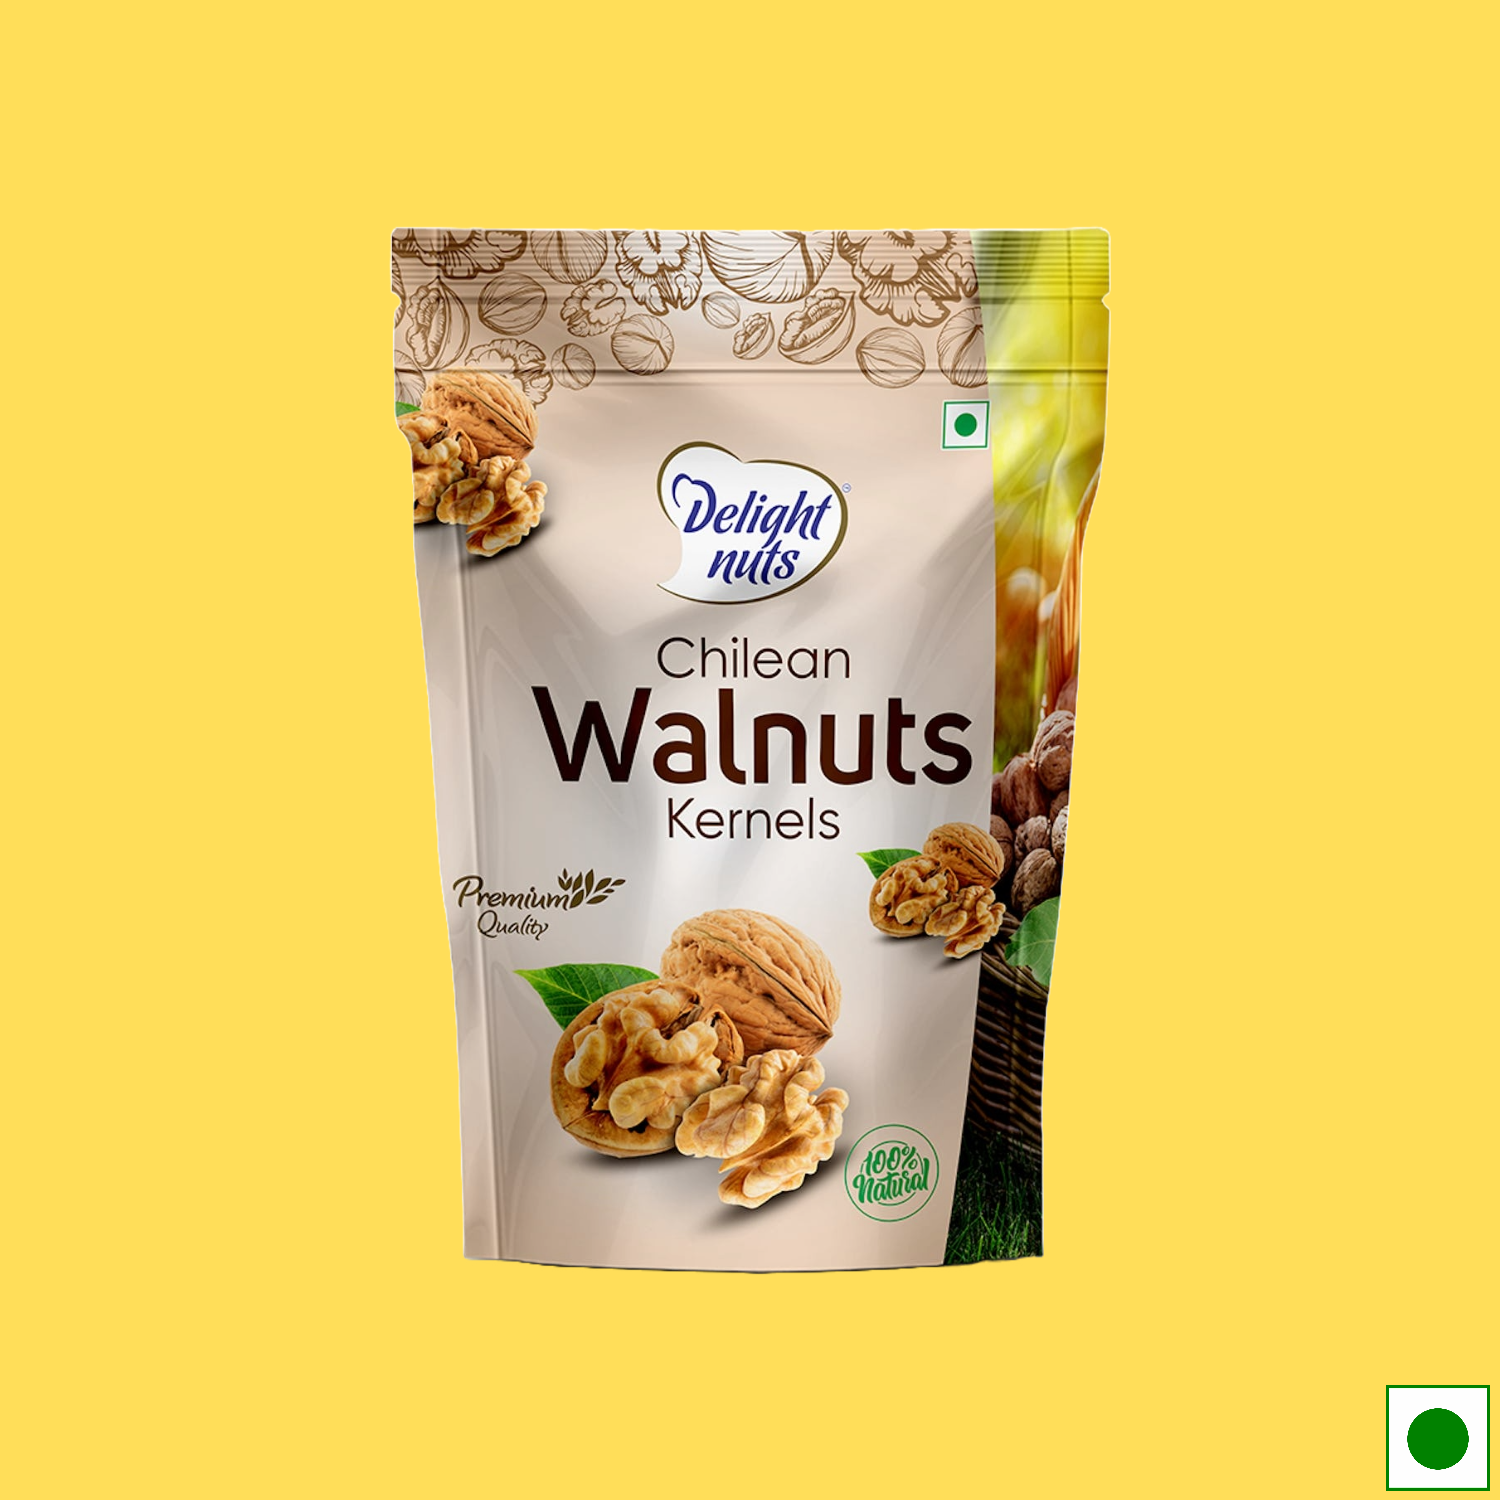 Delight Nuts Chilean Walnuts Kernels Pack, 200g